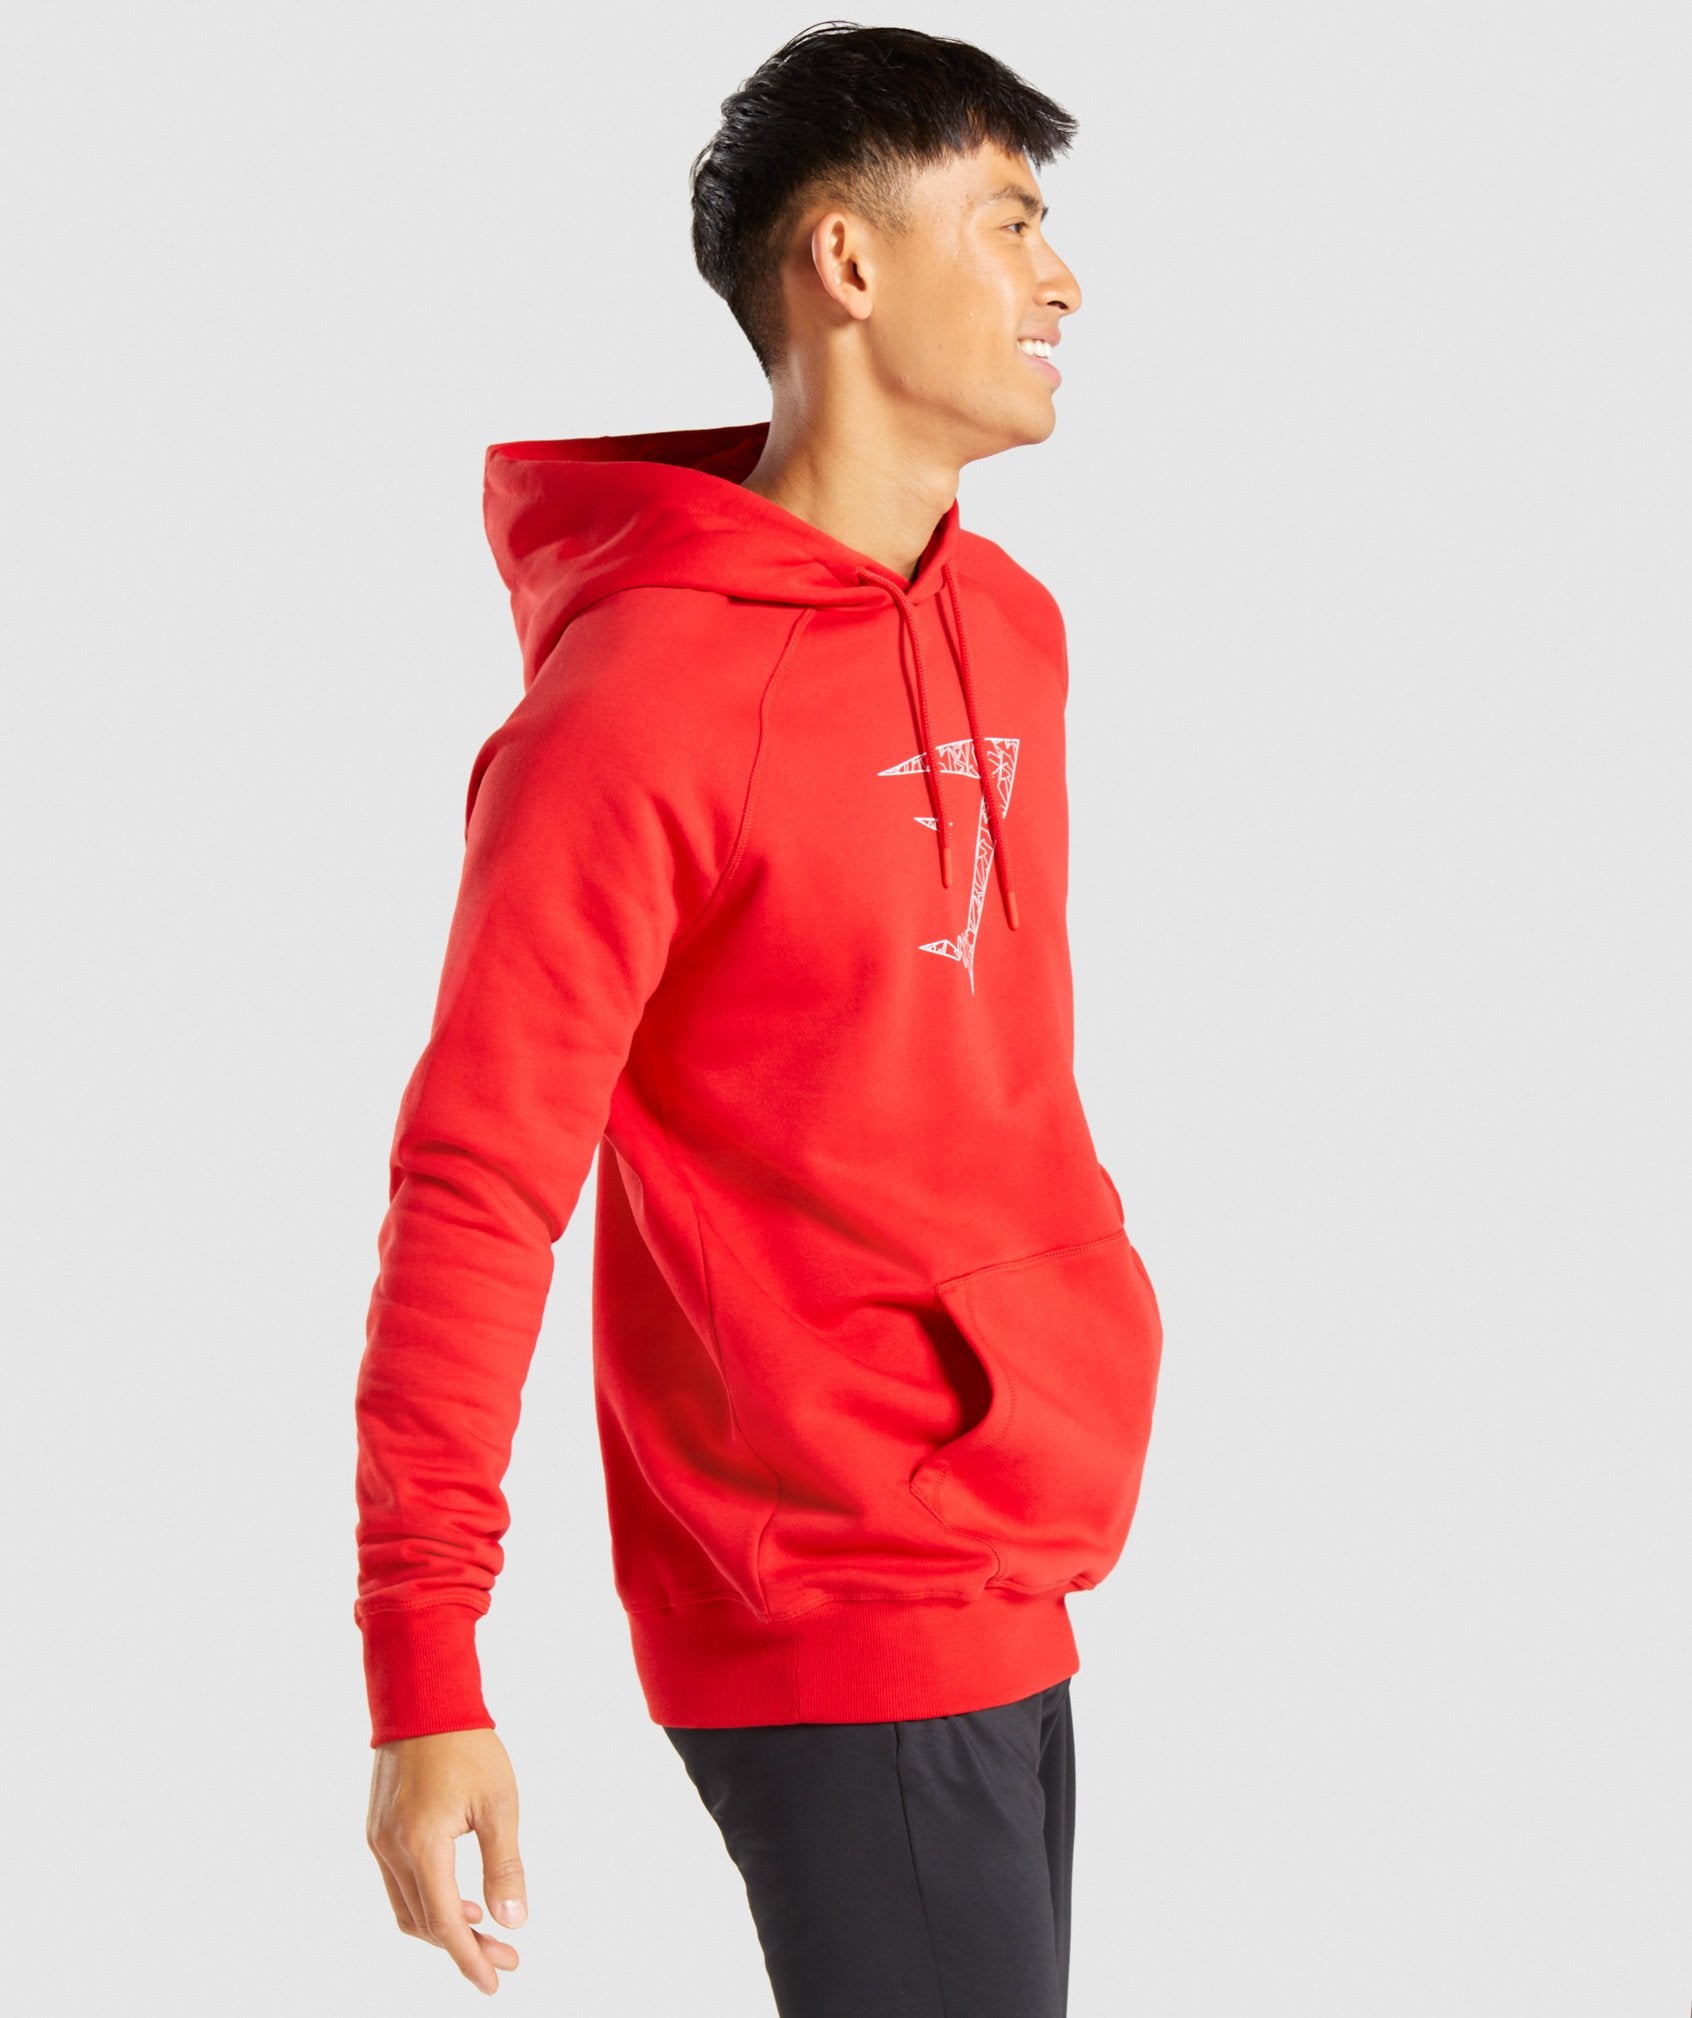 Infill Hoodie in Red